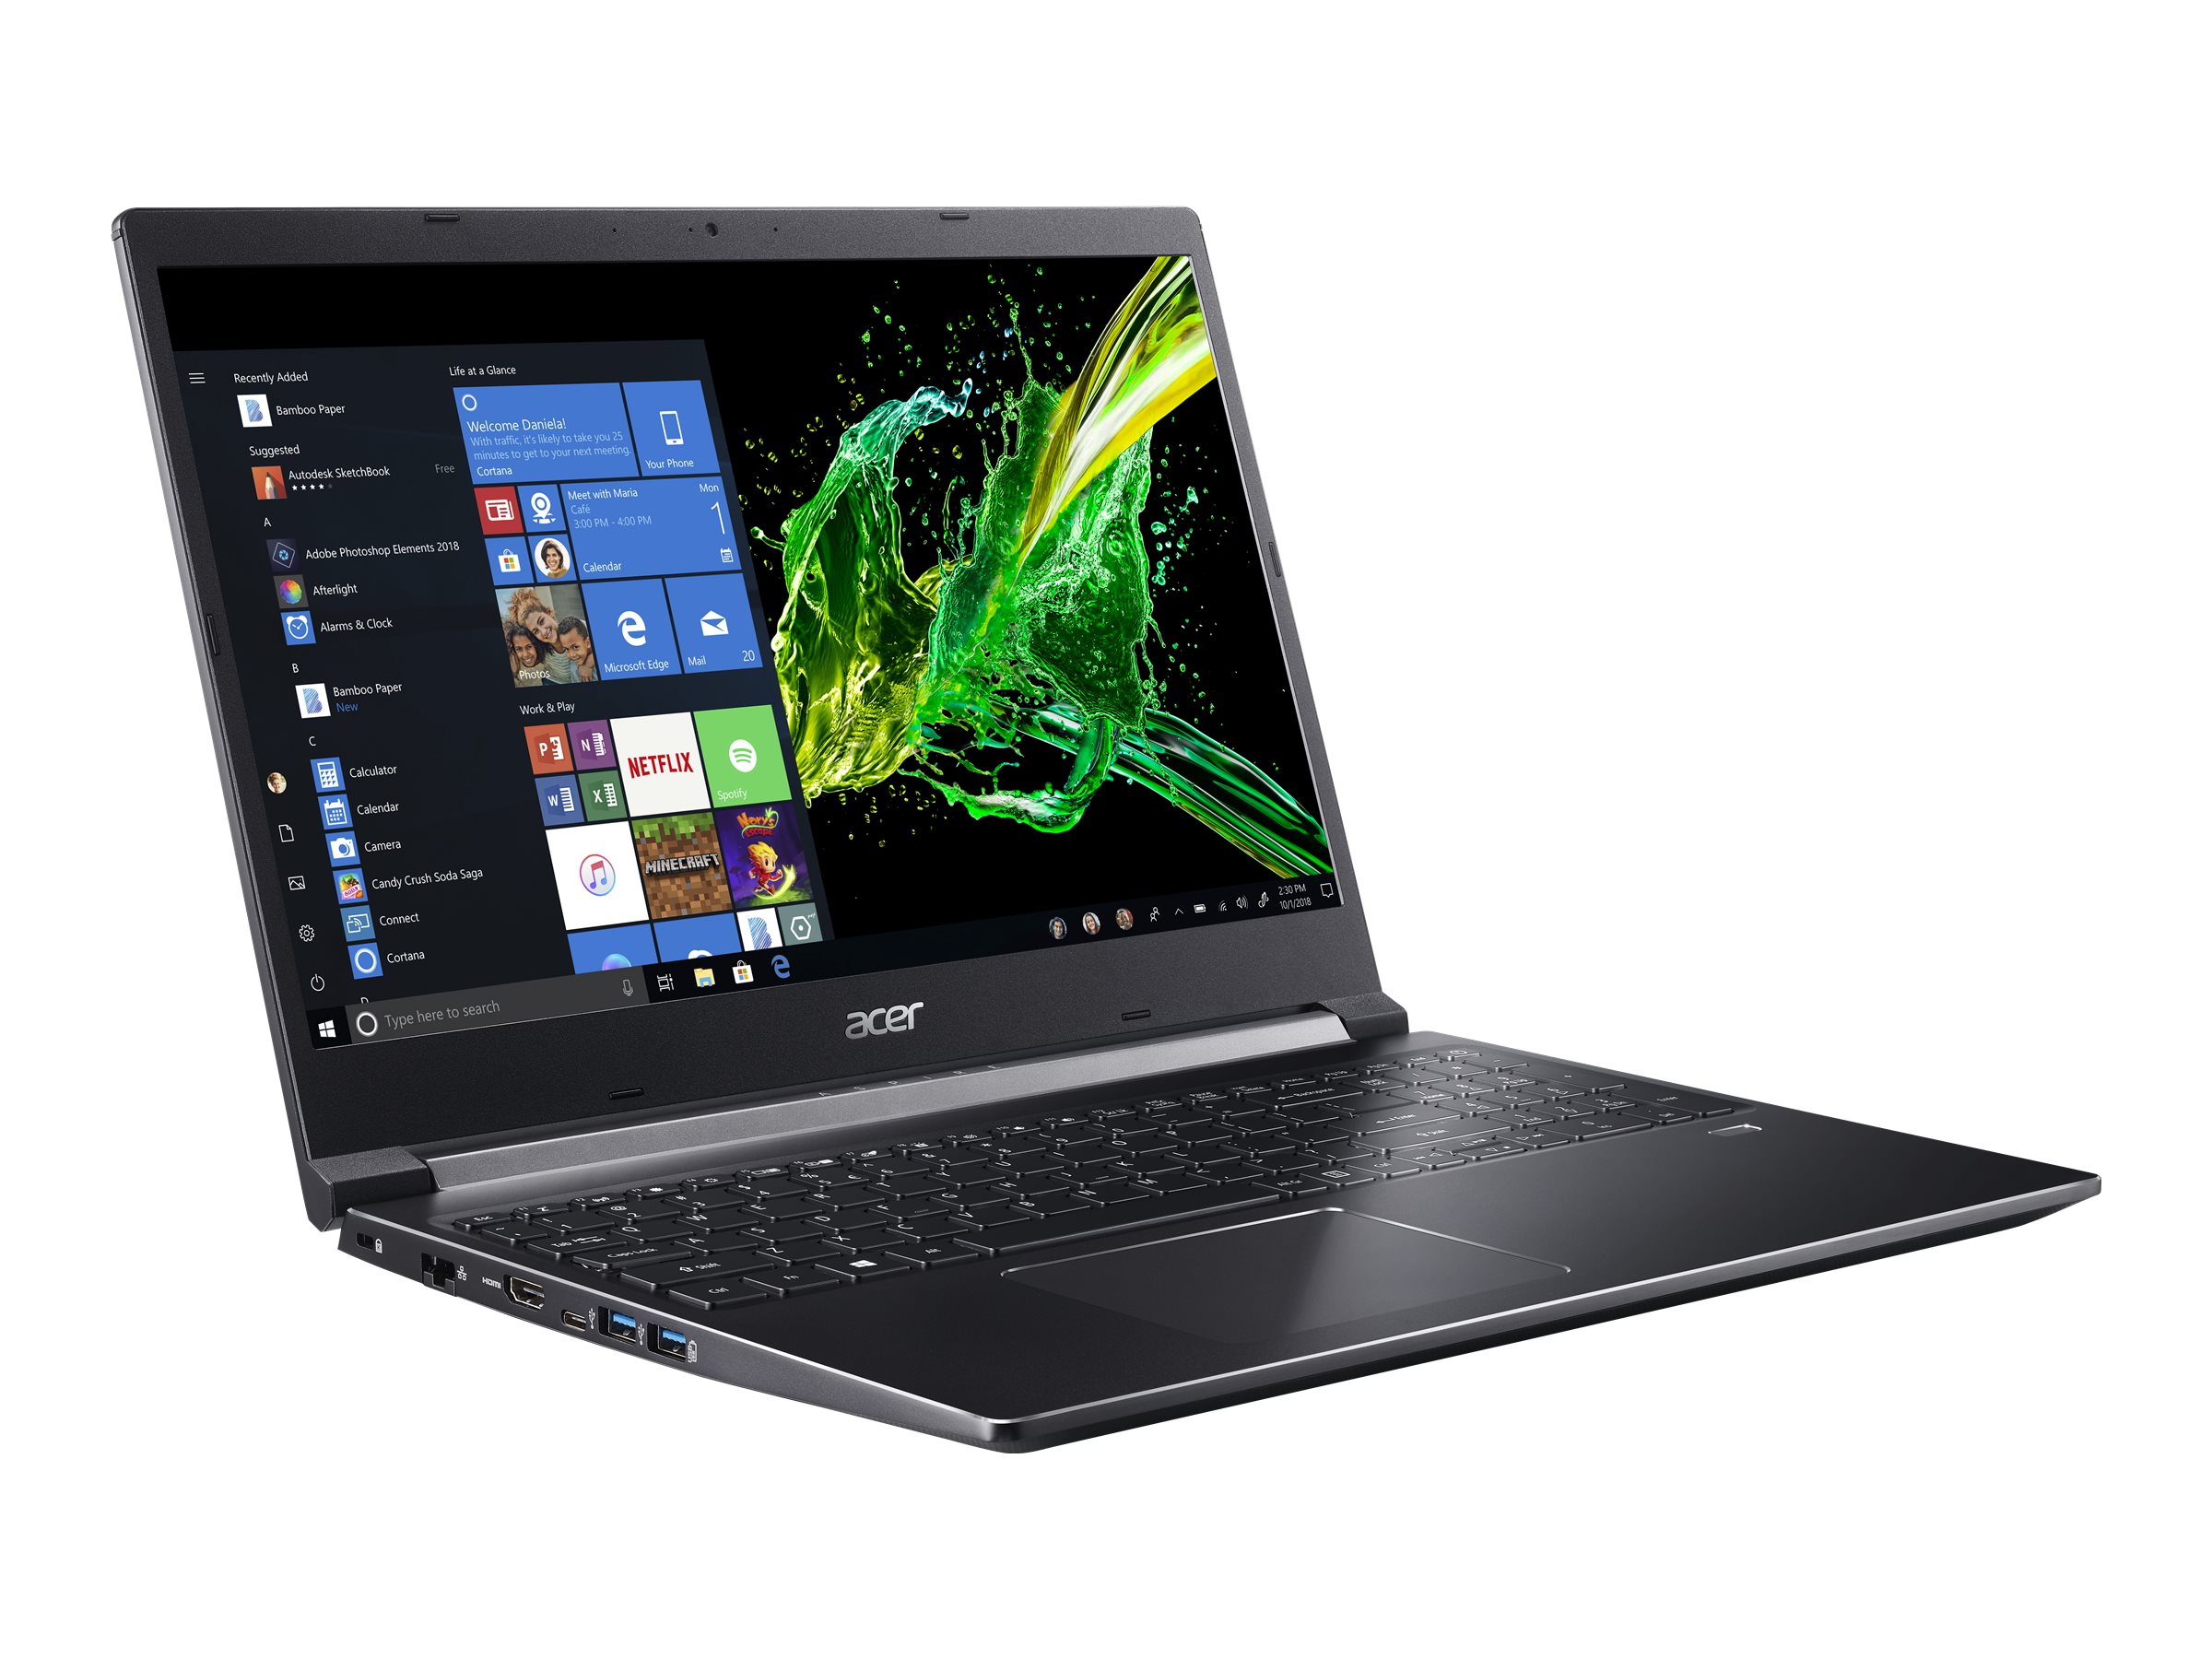 Acer Aspire 7 15.6" Full HD Laptop, Intel Core i7 i7-9750H, 512GB SSD, Windows 10 Home, A715-74G-71WS - image 4 of 8